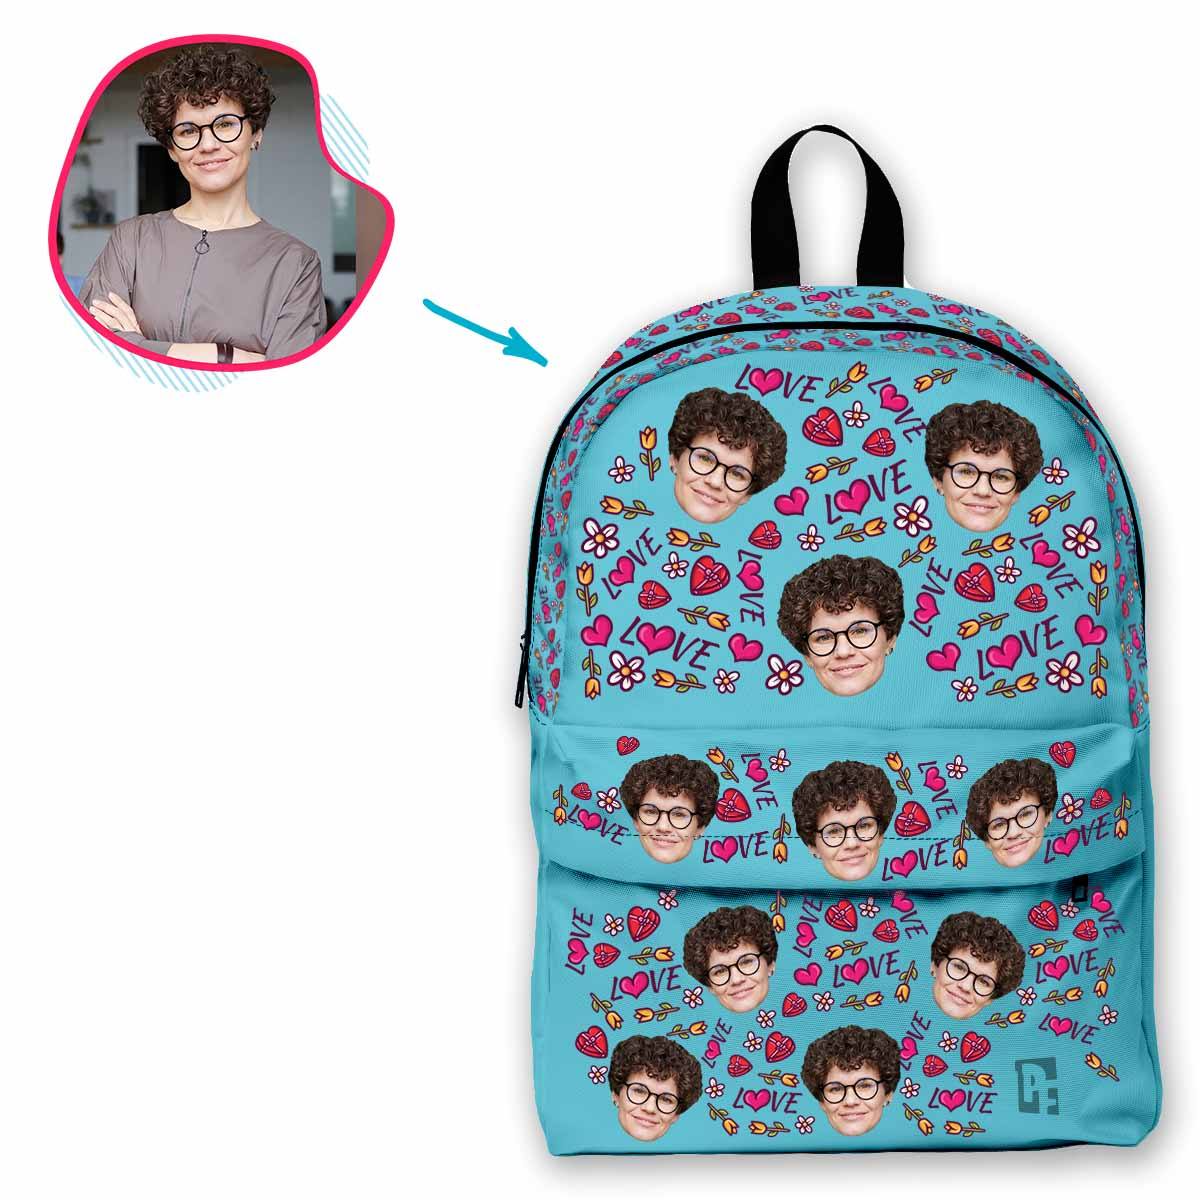 blue Hearts and Flowers classic backpack personalized with photo of face printed on it